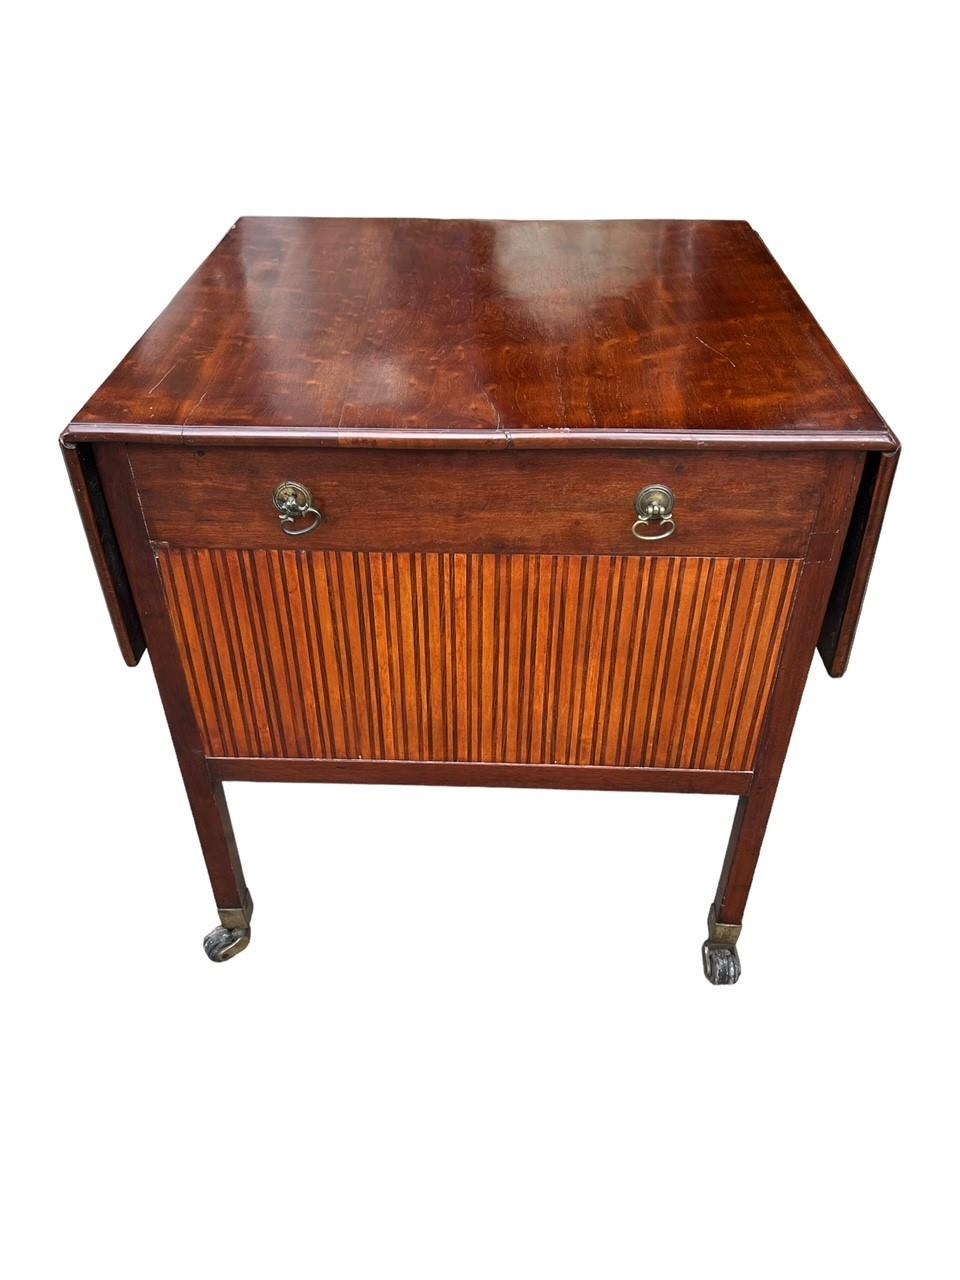 MANNER OF THOMAS CHIPPENDALE, A FREESTANDING GEORGE III PLUM MAHOGANY AND HARWOOD INLAID DROP FLAP - Image 5 of 17